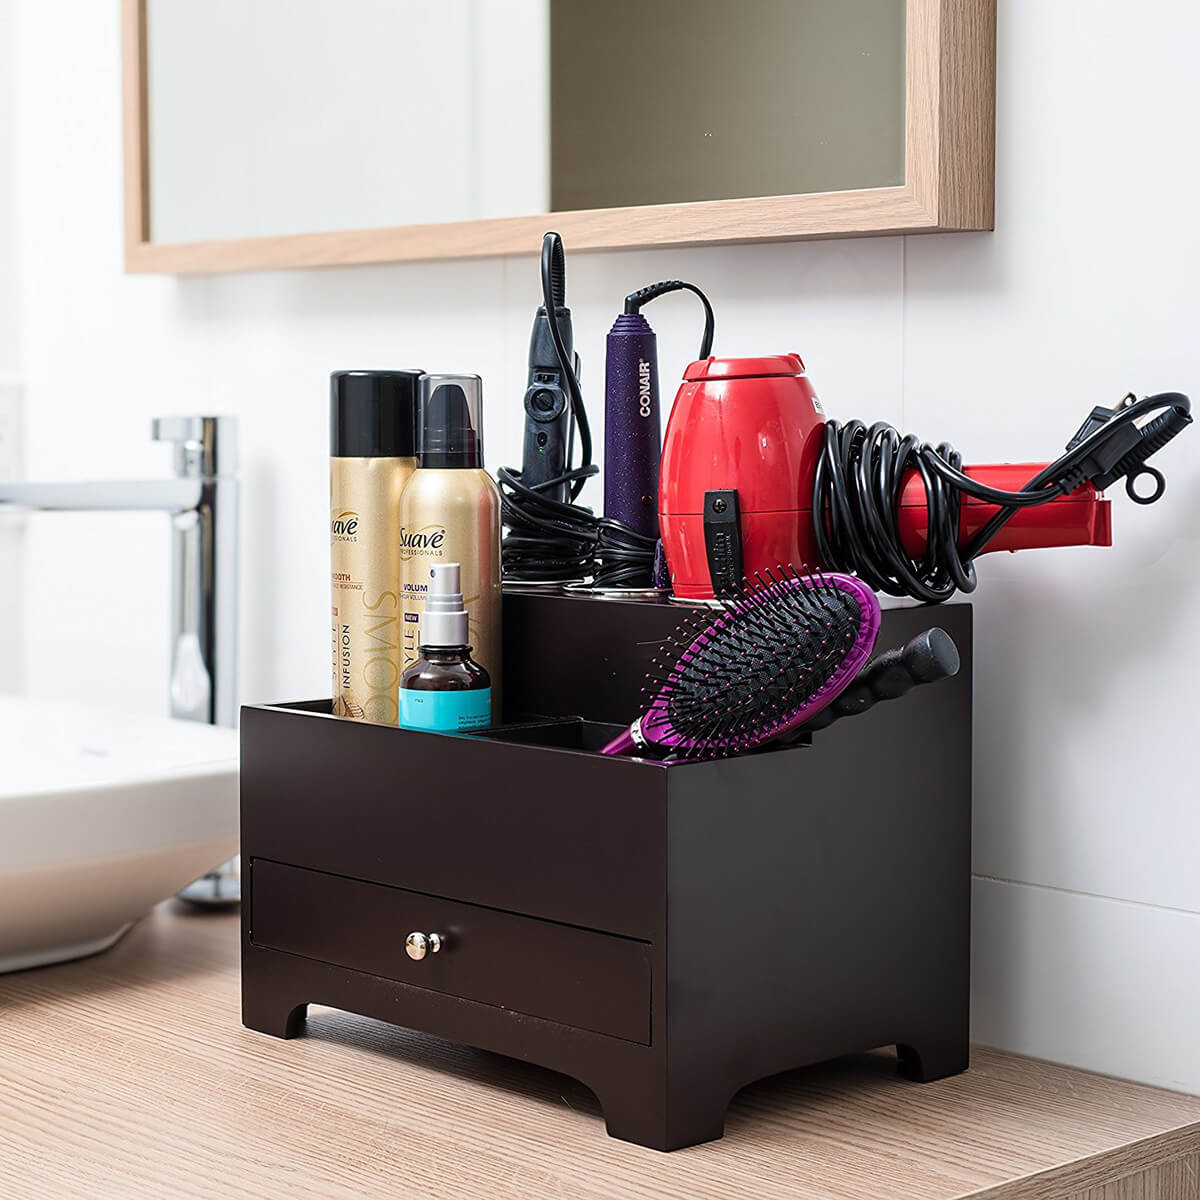 Two-tiered Hair Styling Tool Best Bathroom Organizer